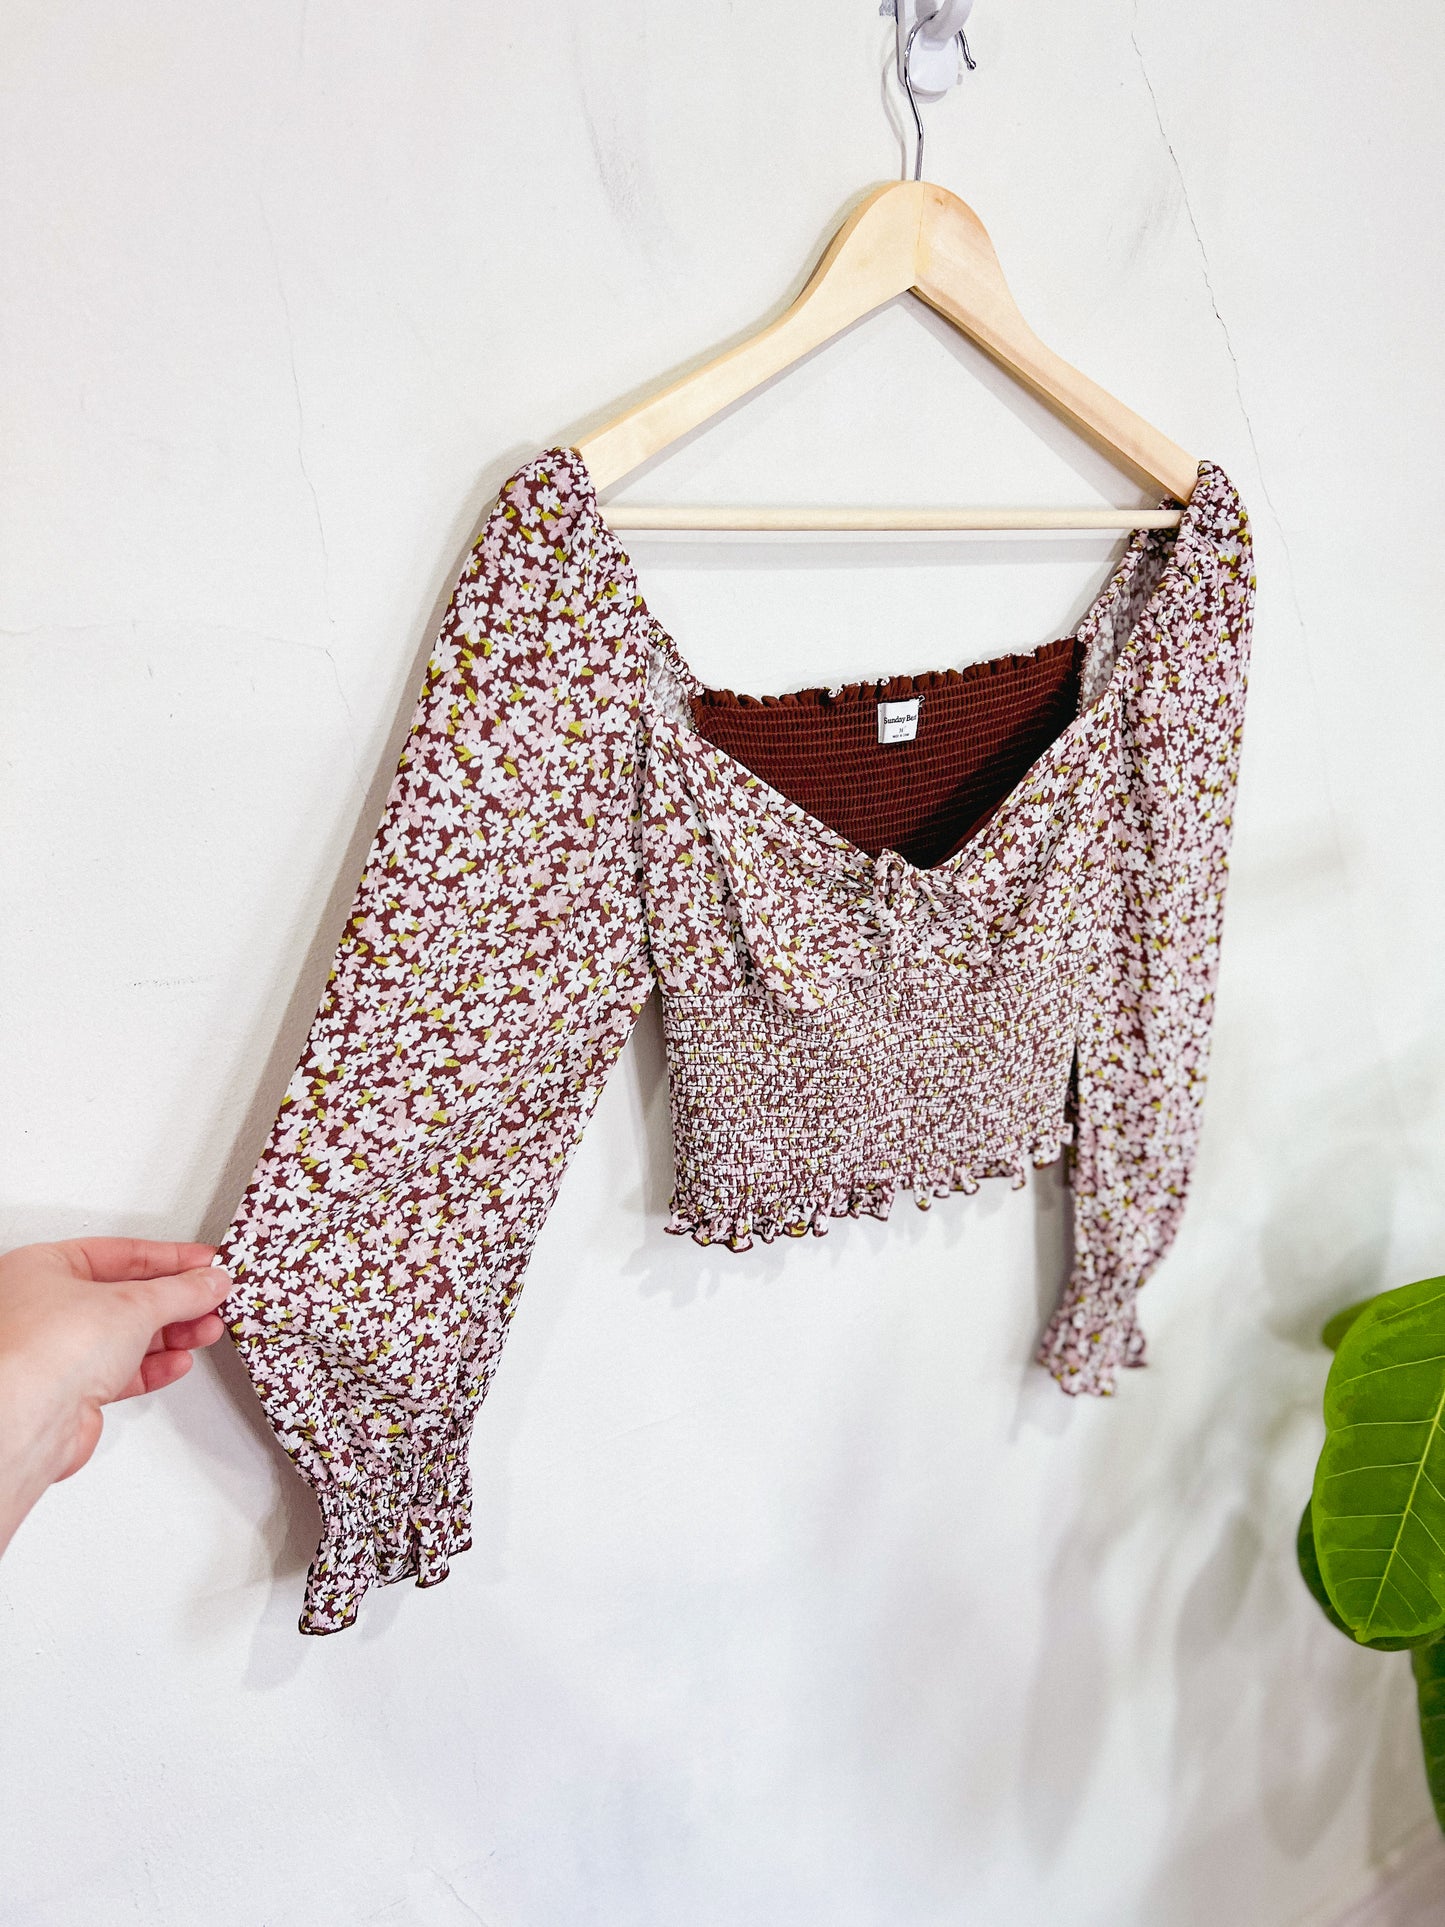 Sunday Best "Sinatra Blouse" in Brown/Pink Floral (Size M)